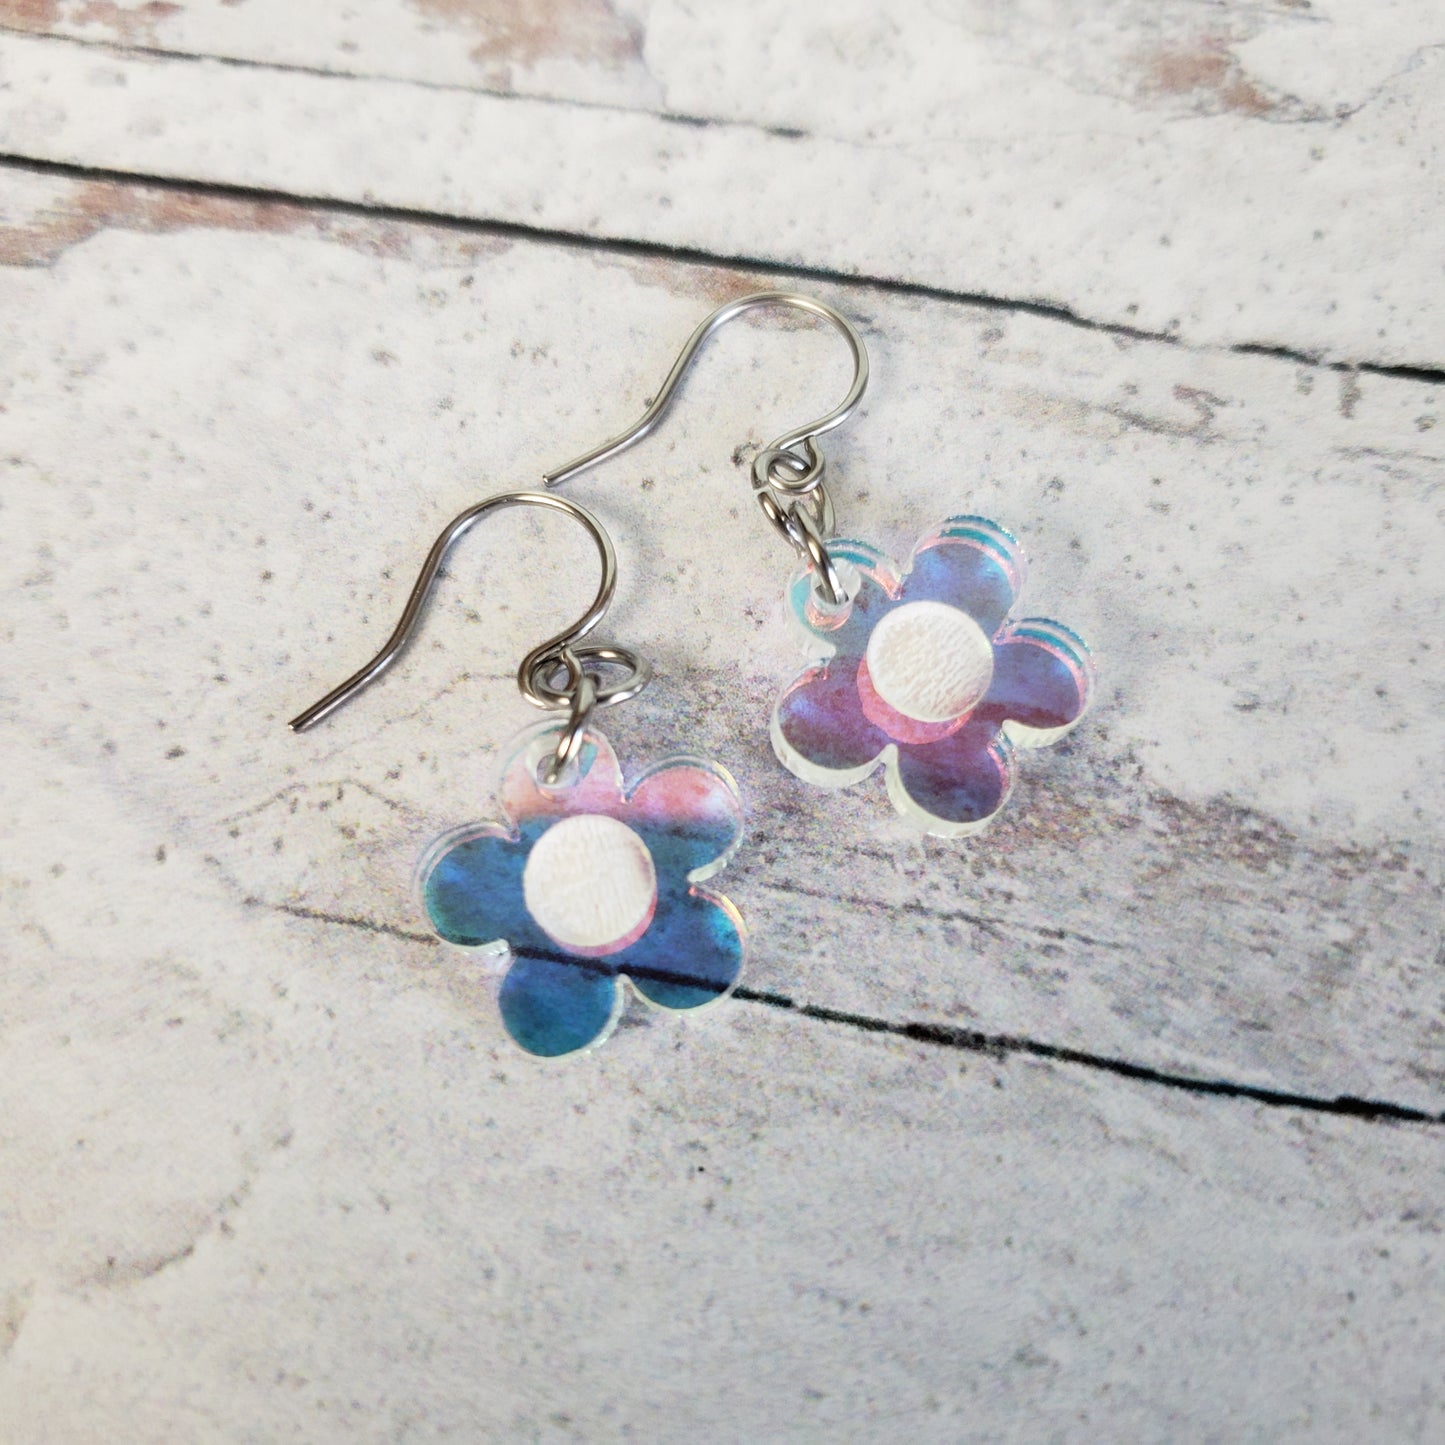 Small rainbow iridescent daisy flowers on small stainless steel ear wires.